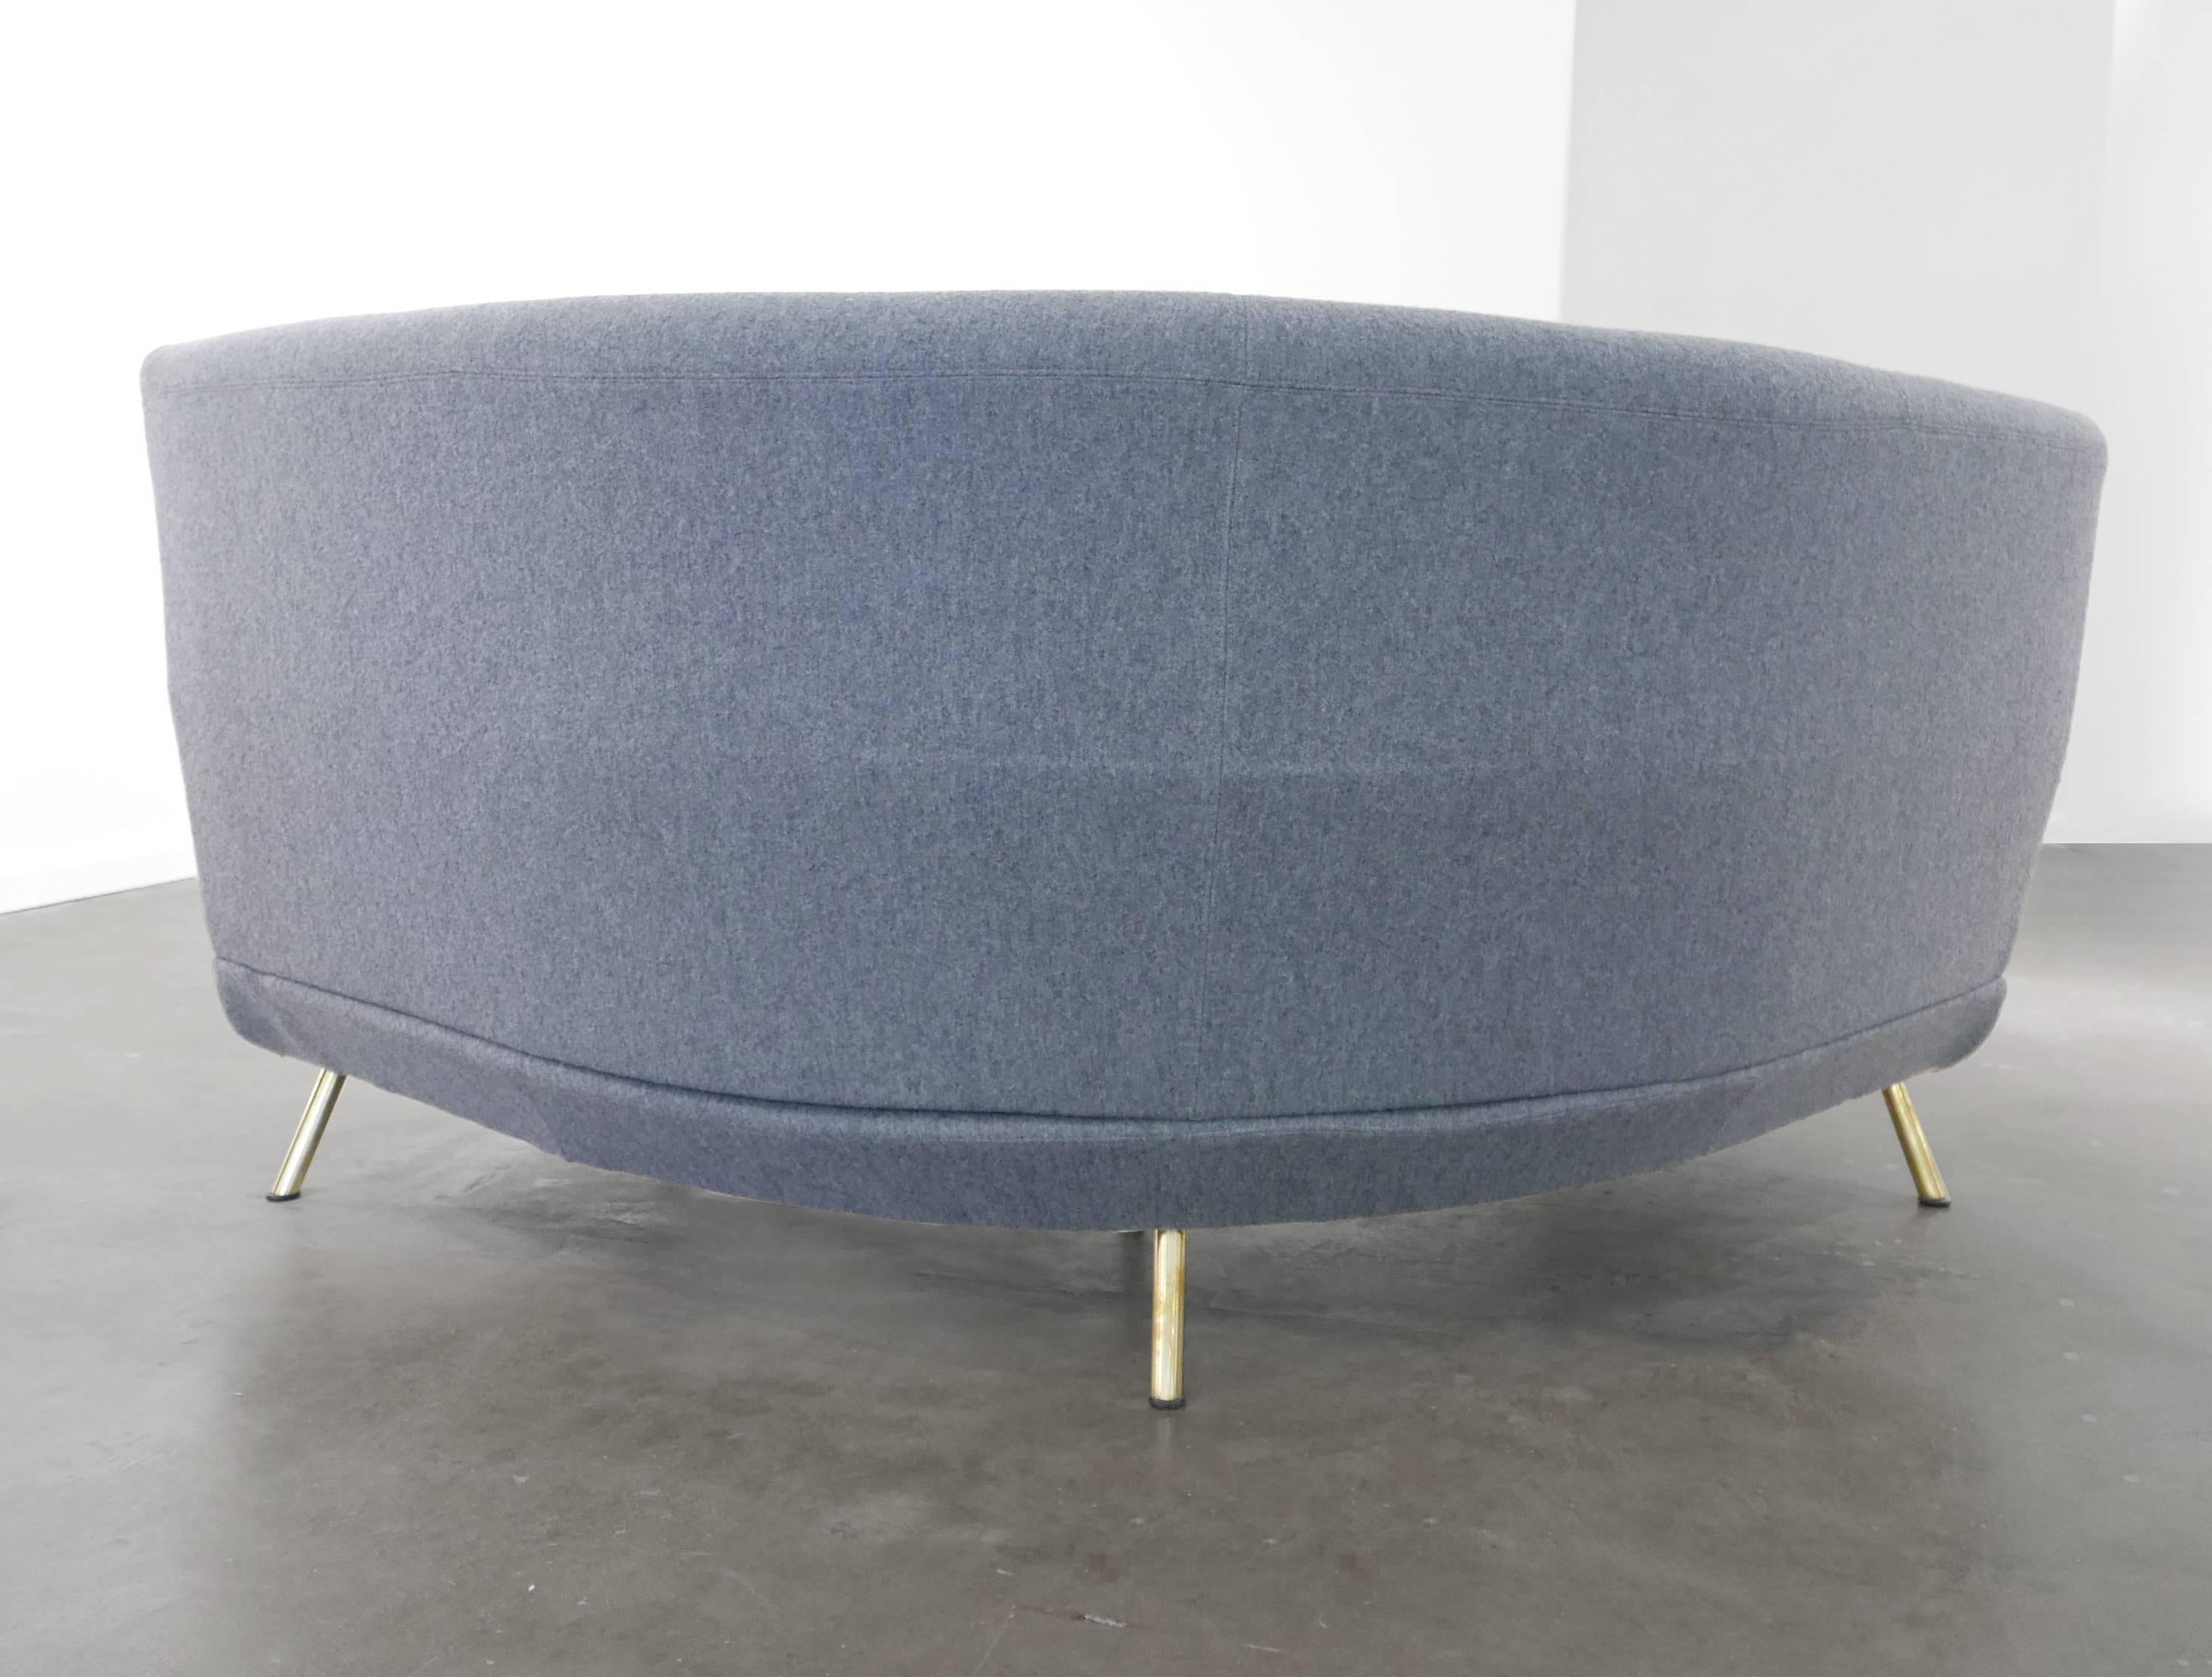 Triennale corner sofa designed by Marco Zanuso in 1951. Produced by Arflex. Recently reupholstered in Holland and Sherry boiled wool.